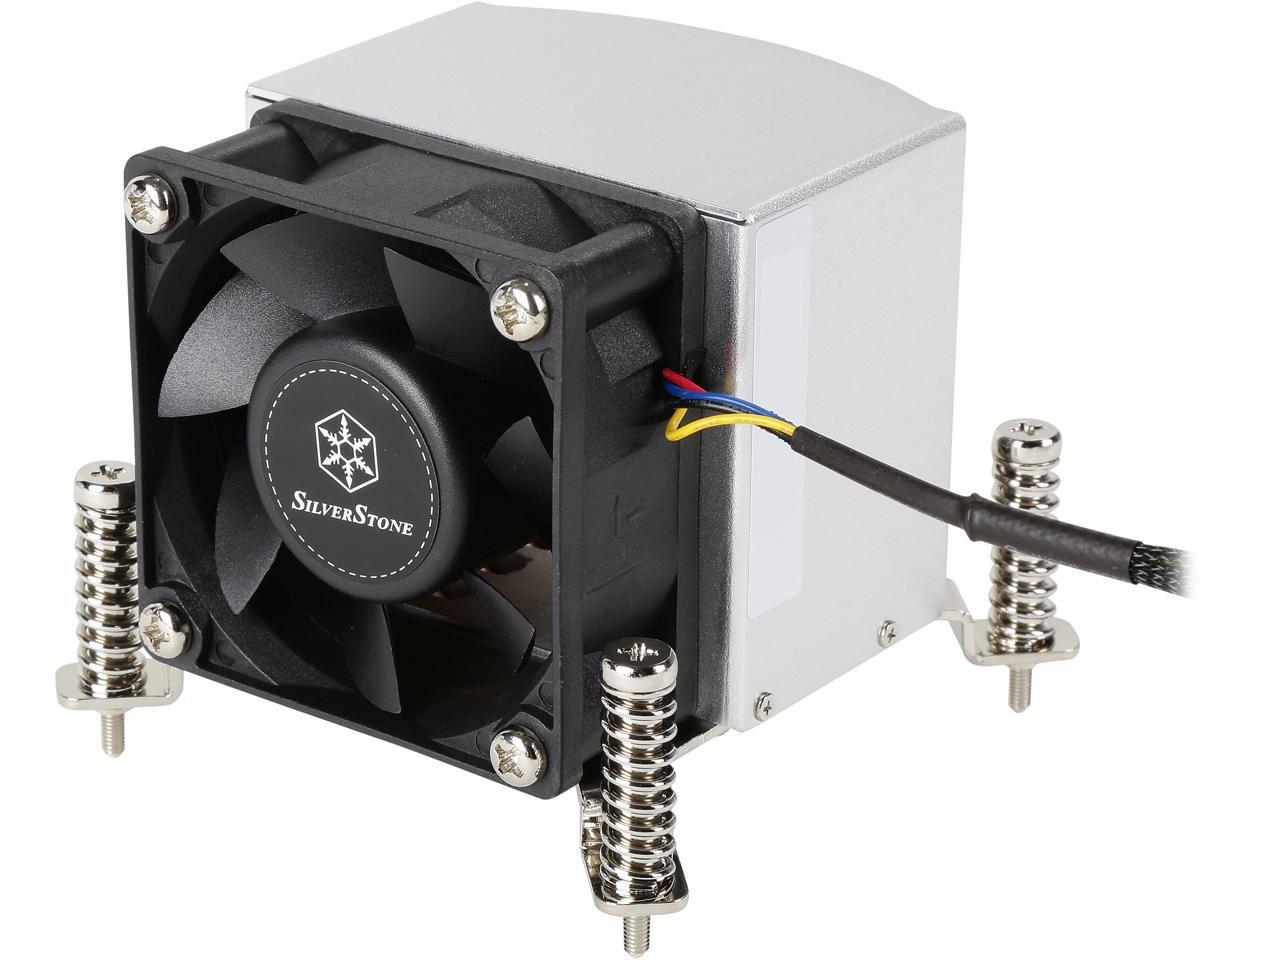 SILVERSTONE SST-AR09-115XS 60mm 2 Ball CPU Cooling 